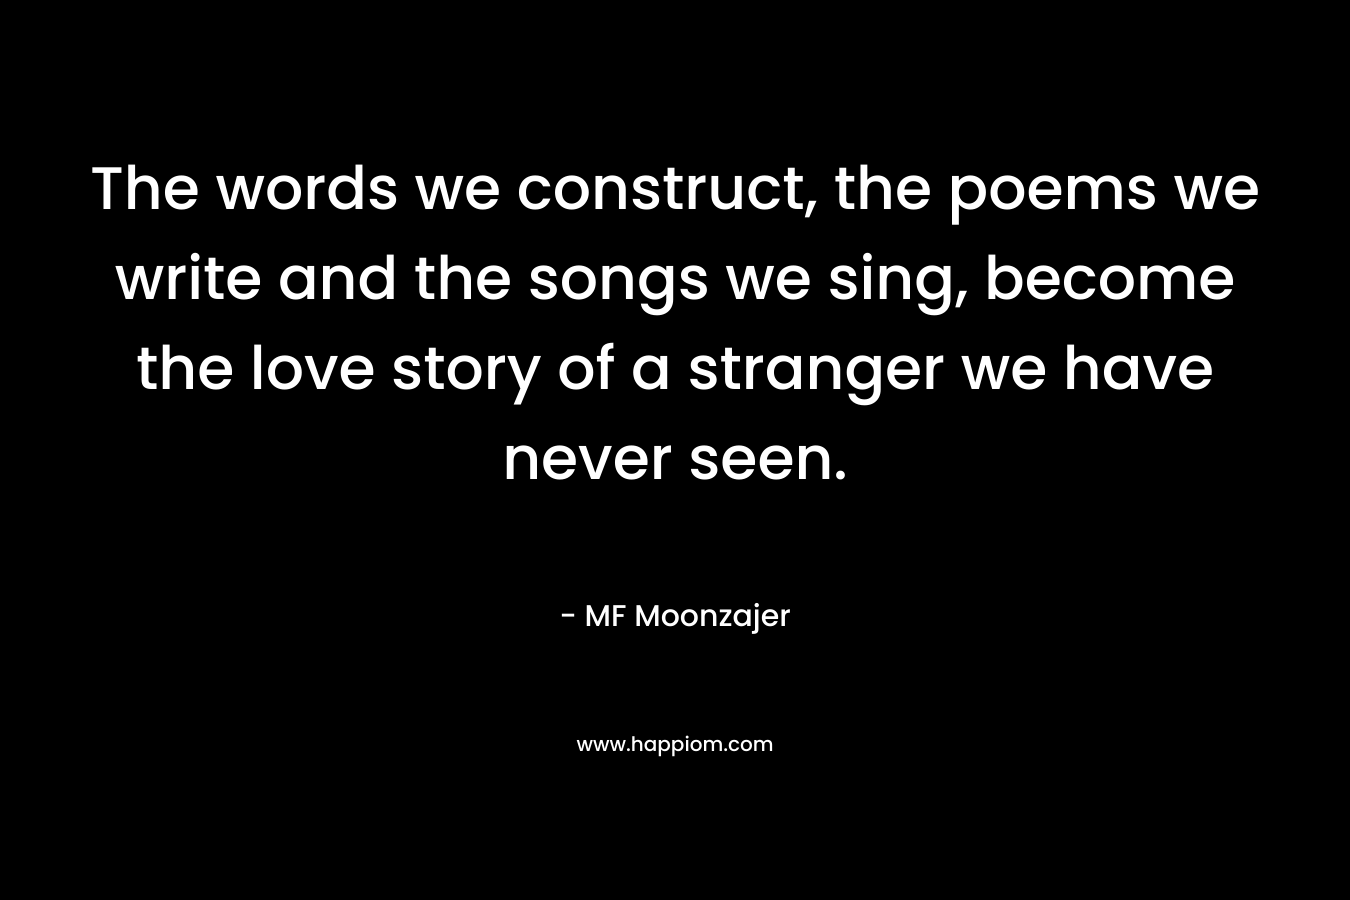 The words we construct, the poems we write and the songs we sing, become the love story of a stranger we have never seen. – MF Moonzajer